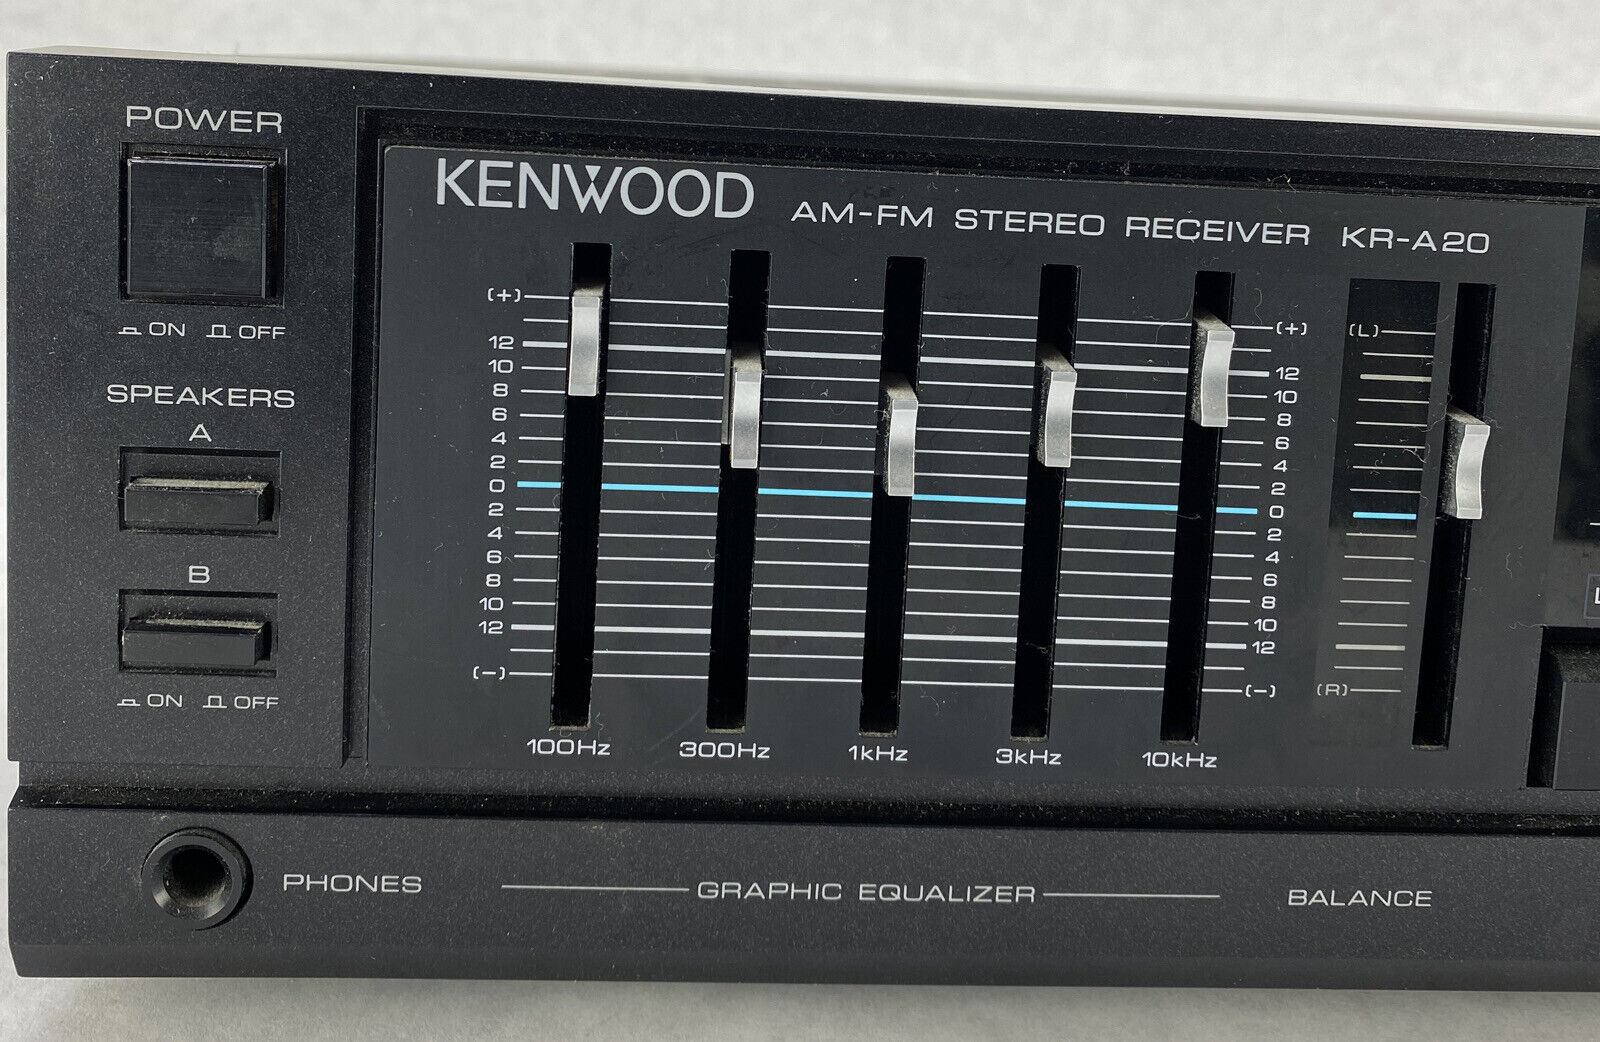 Kenwood KR-A20 Stereo Receiver Computerized Quartz Synthesizer Tuner RARE Japan